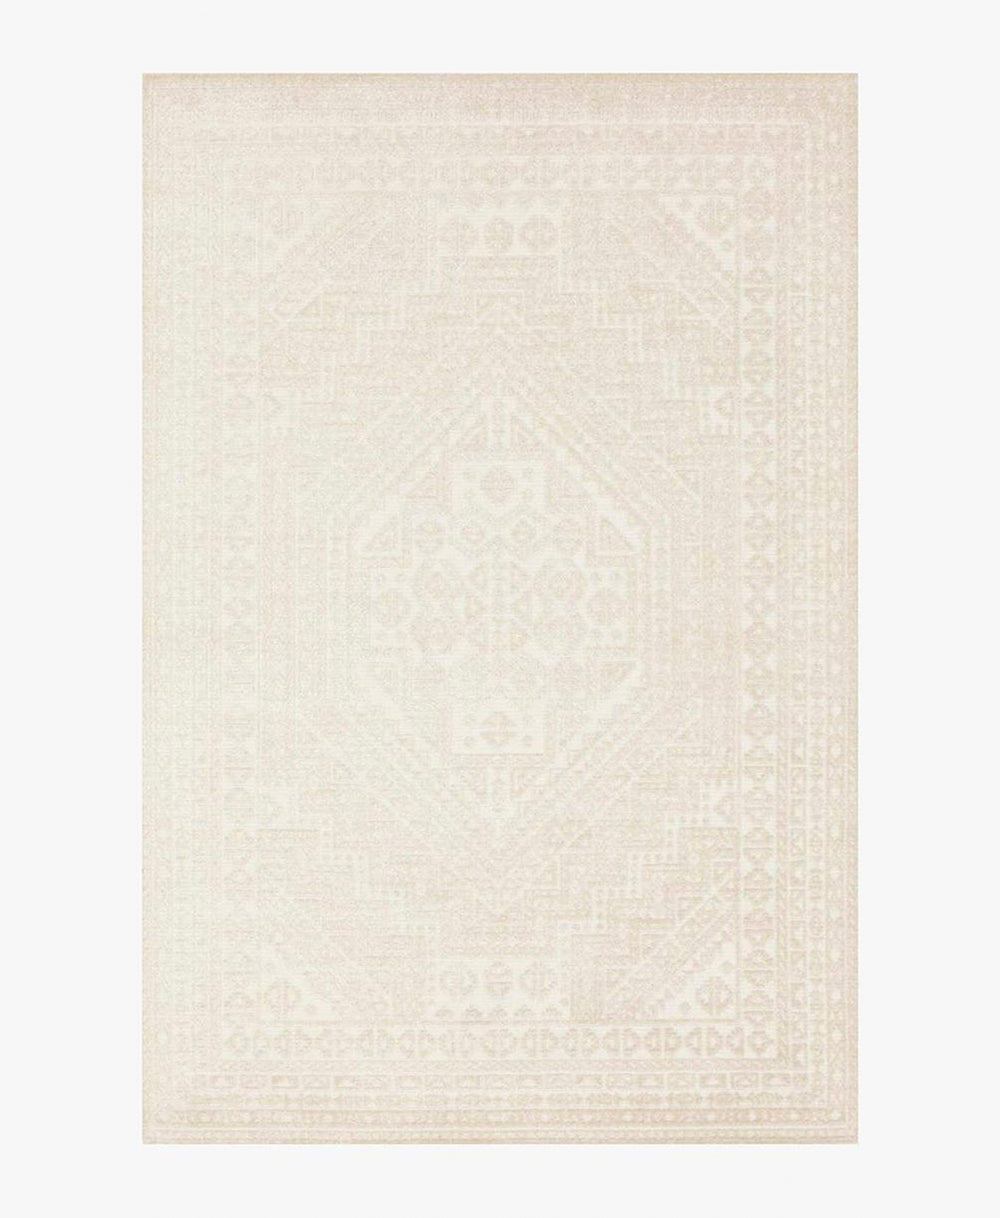 Sonoma Indoor/Outdoor Rug - Final Sale - Ivory/White